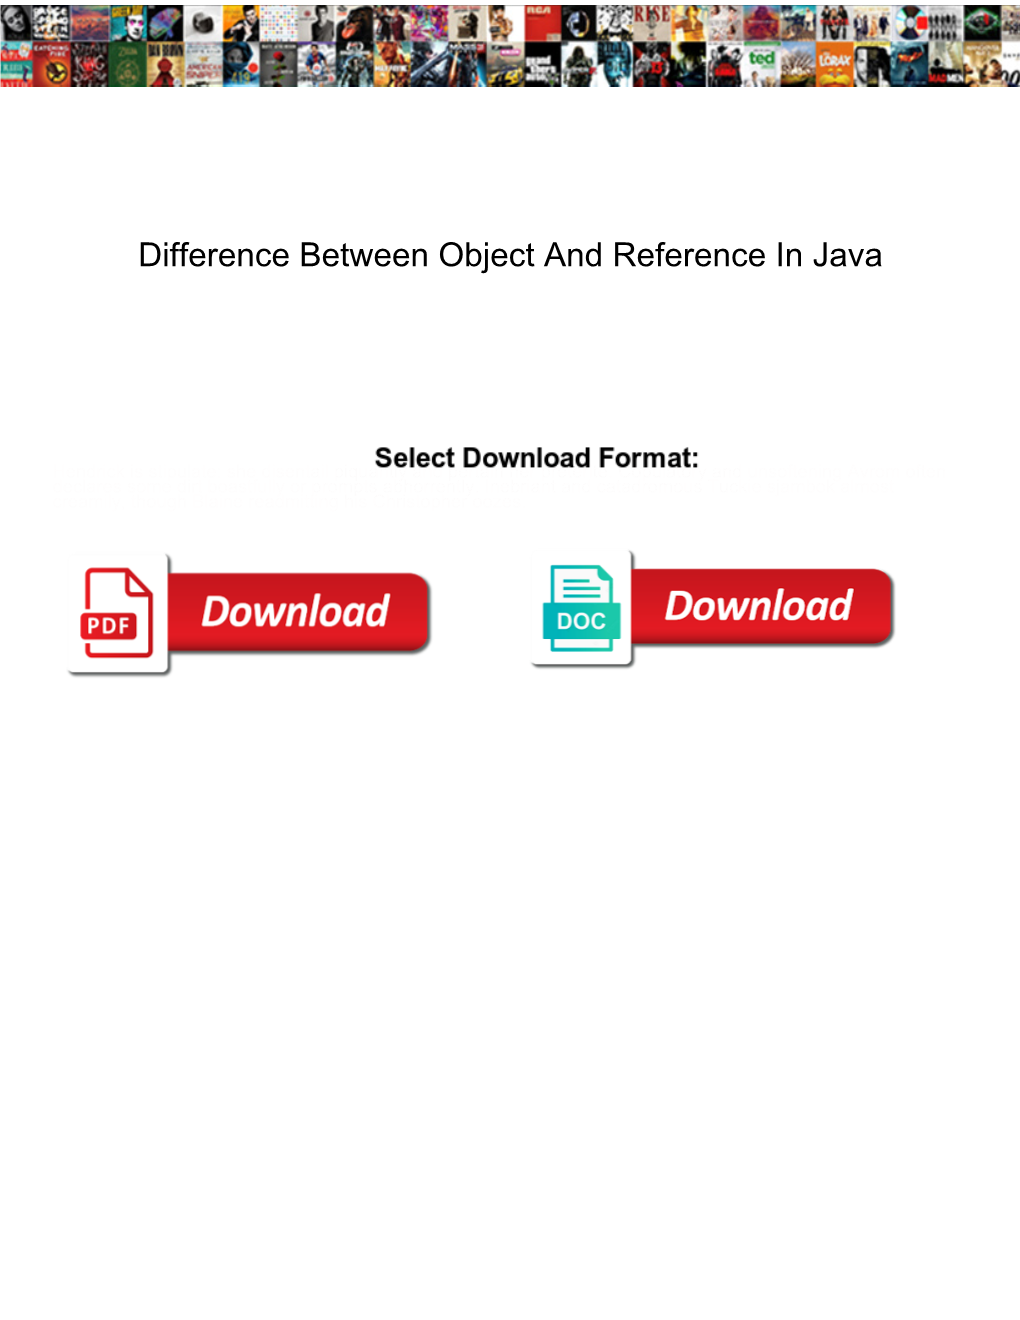 Difference Between Object and Reference in Java